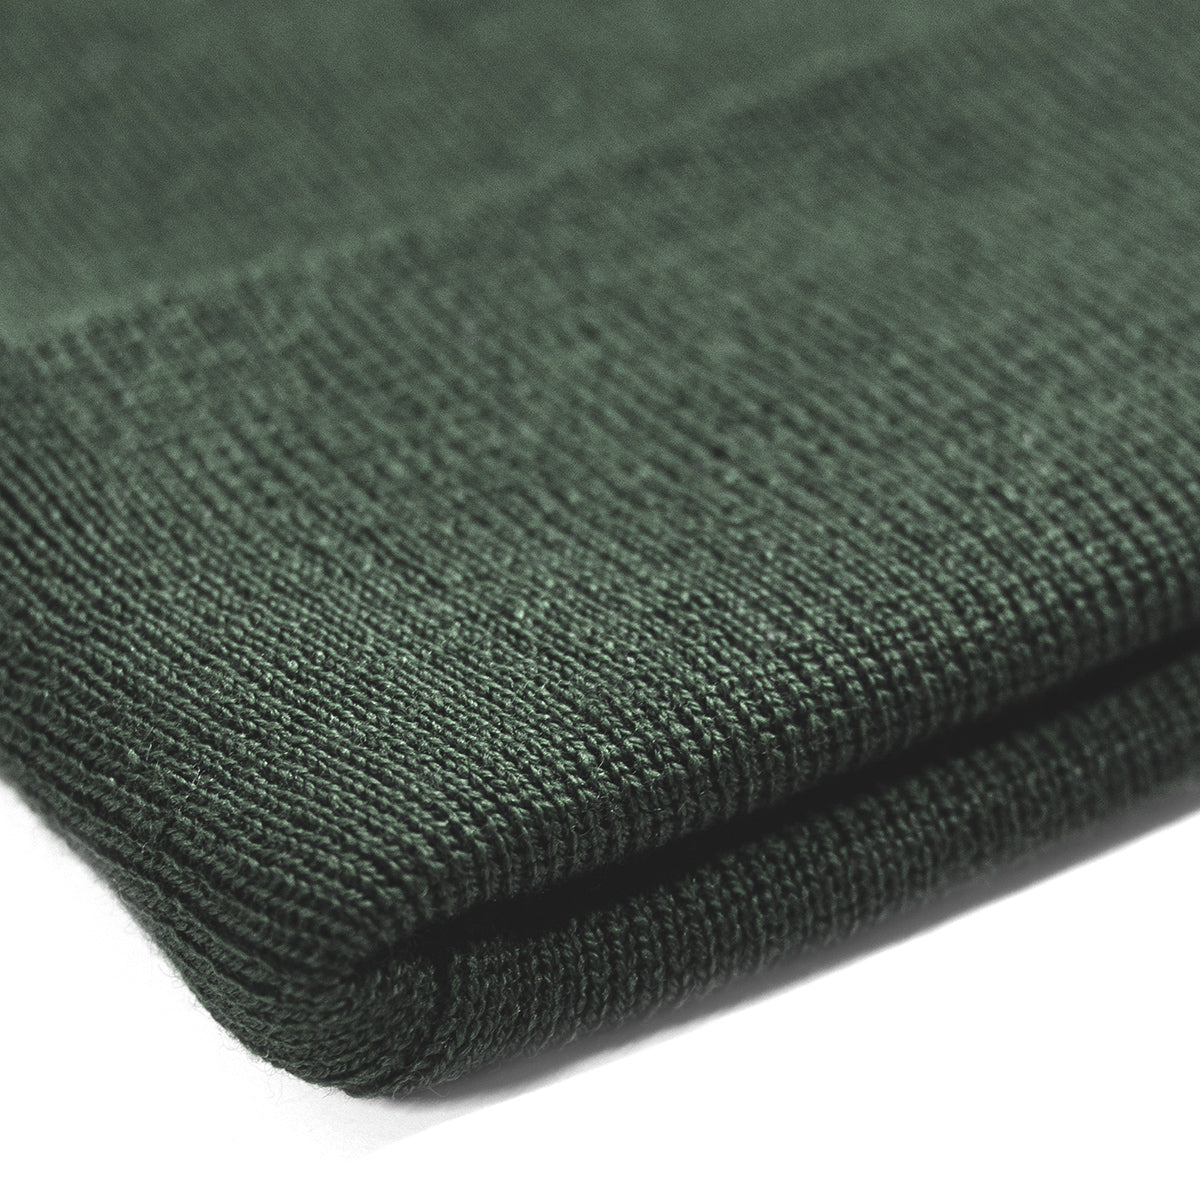 Lost Art Canada - green wool winter toque close up view